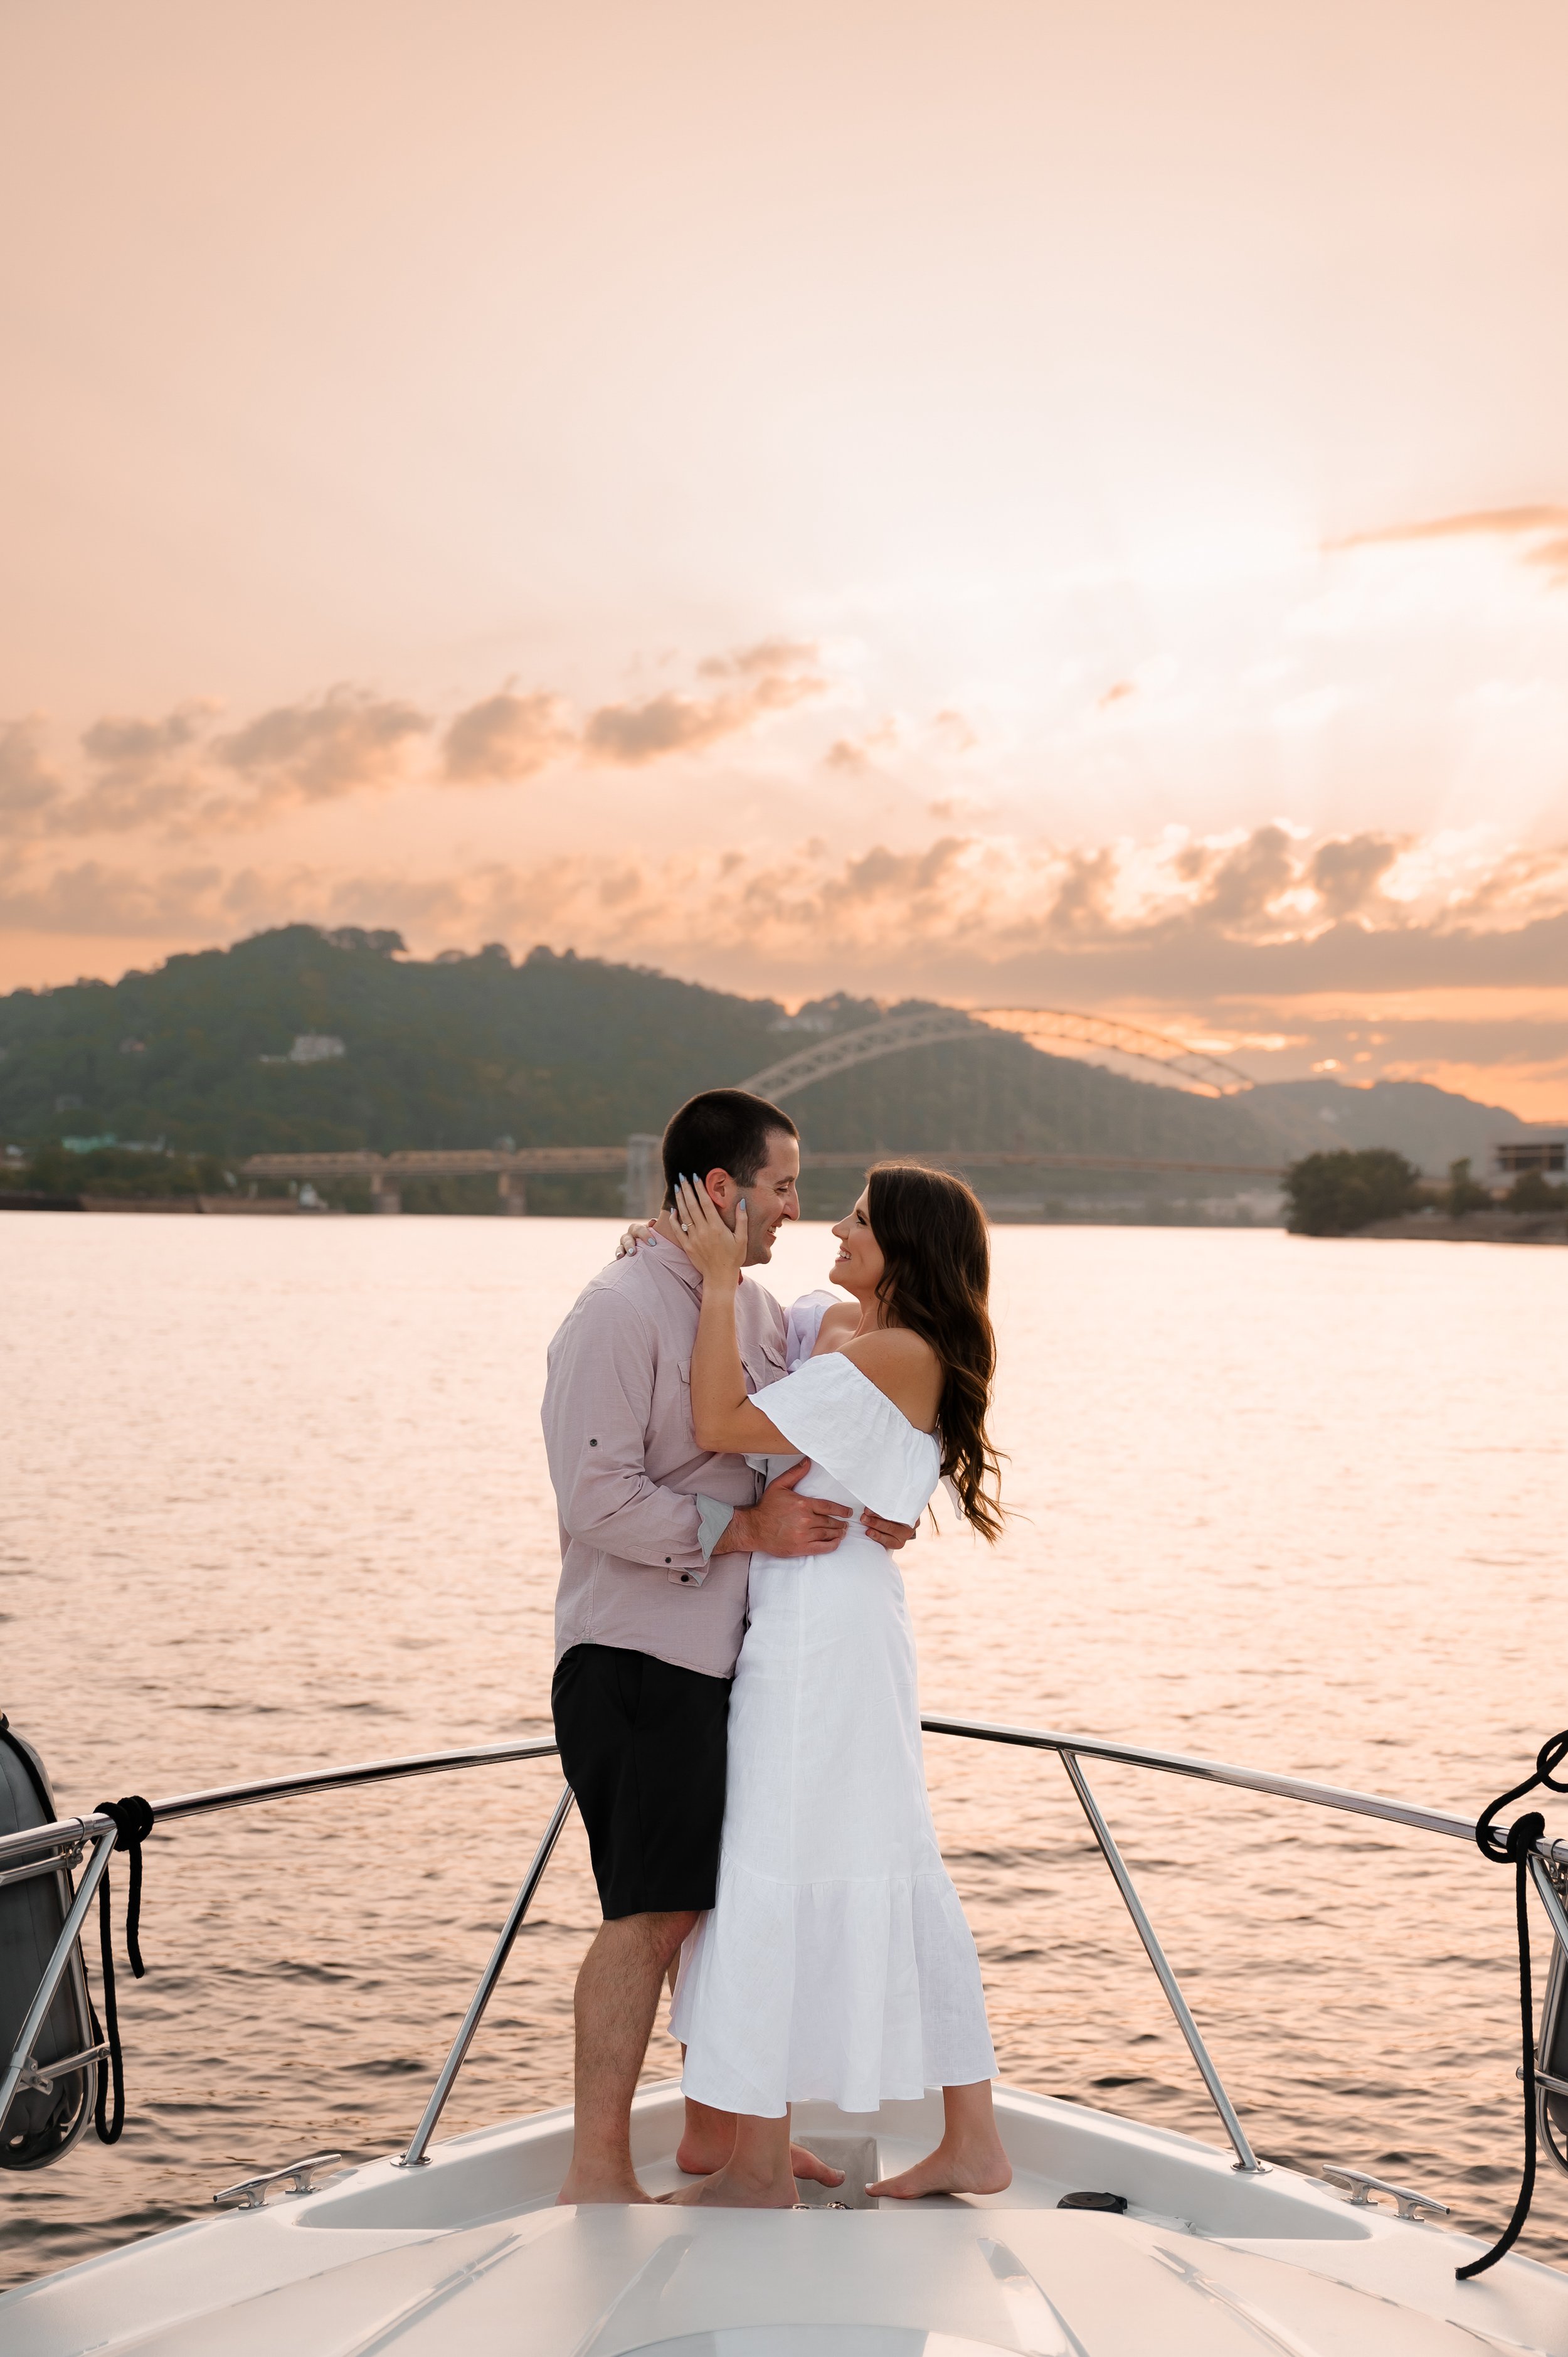 pittsburgh romantic boat down the river t engagement session art-6.jpg